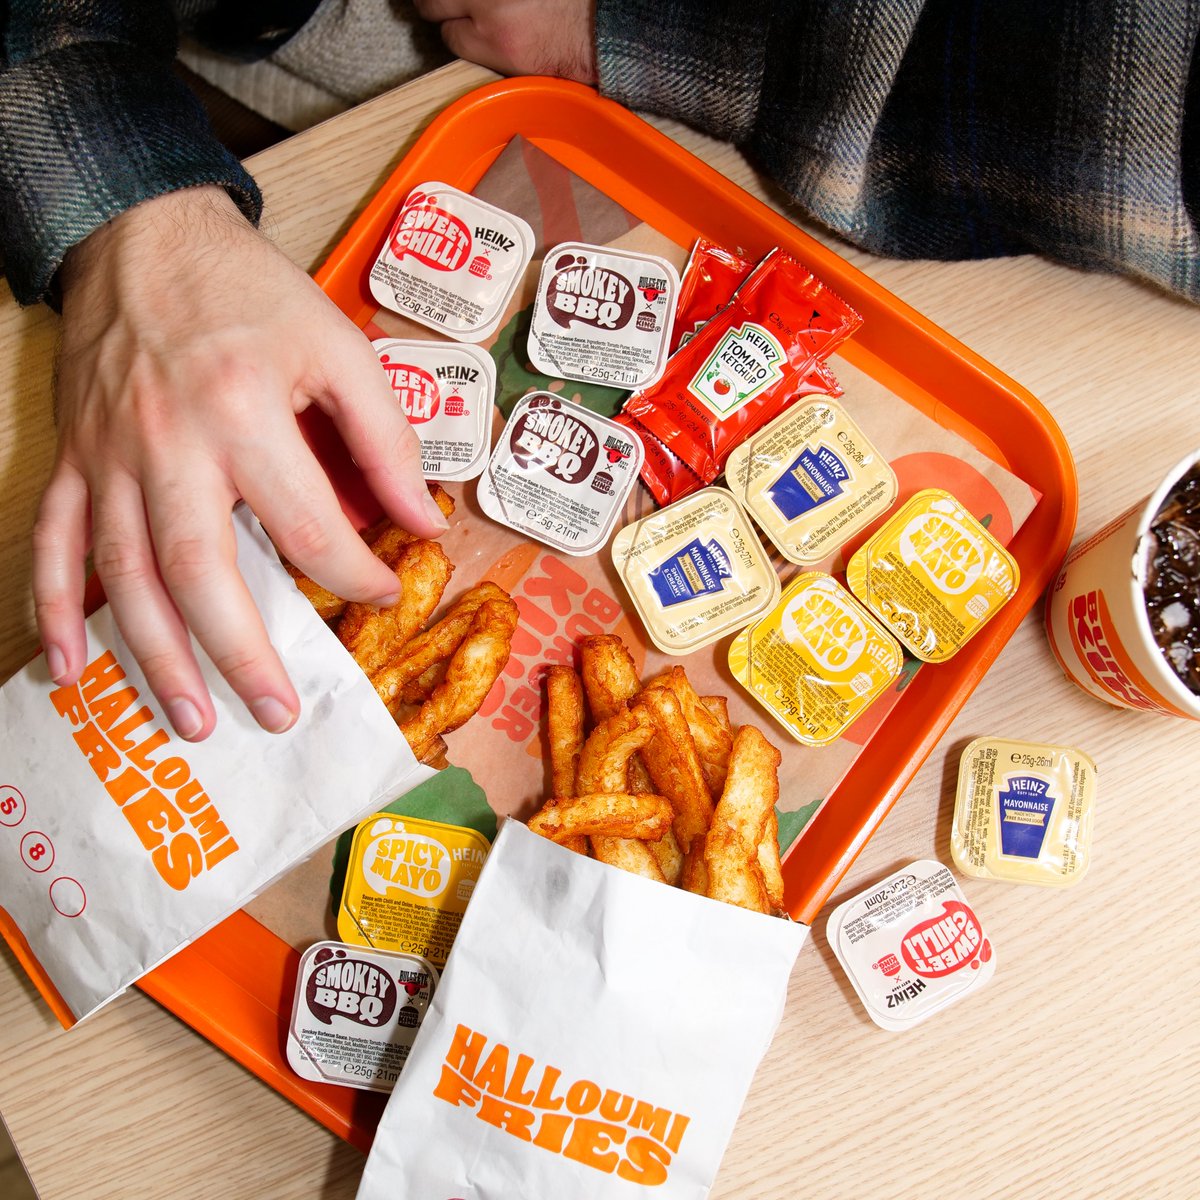 Which sauce should we dip our NEW Halloumi Fries into?